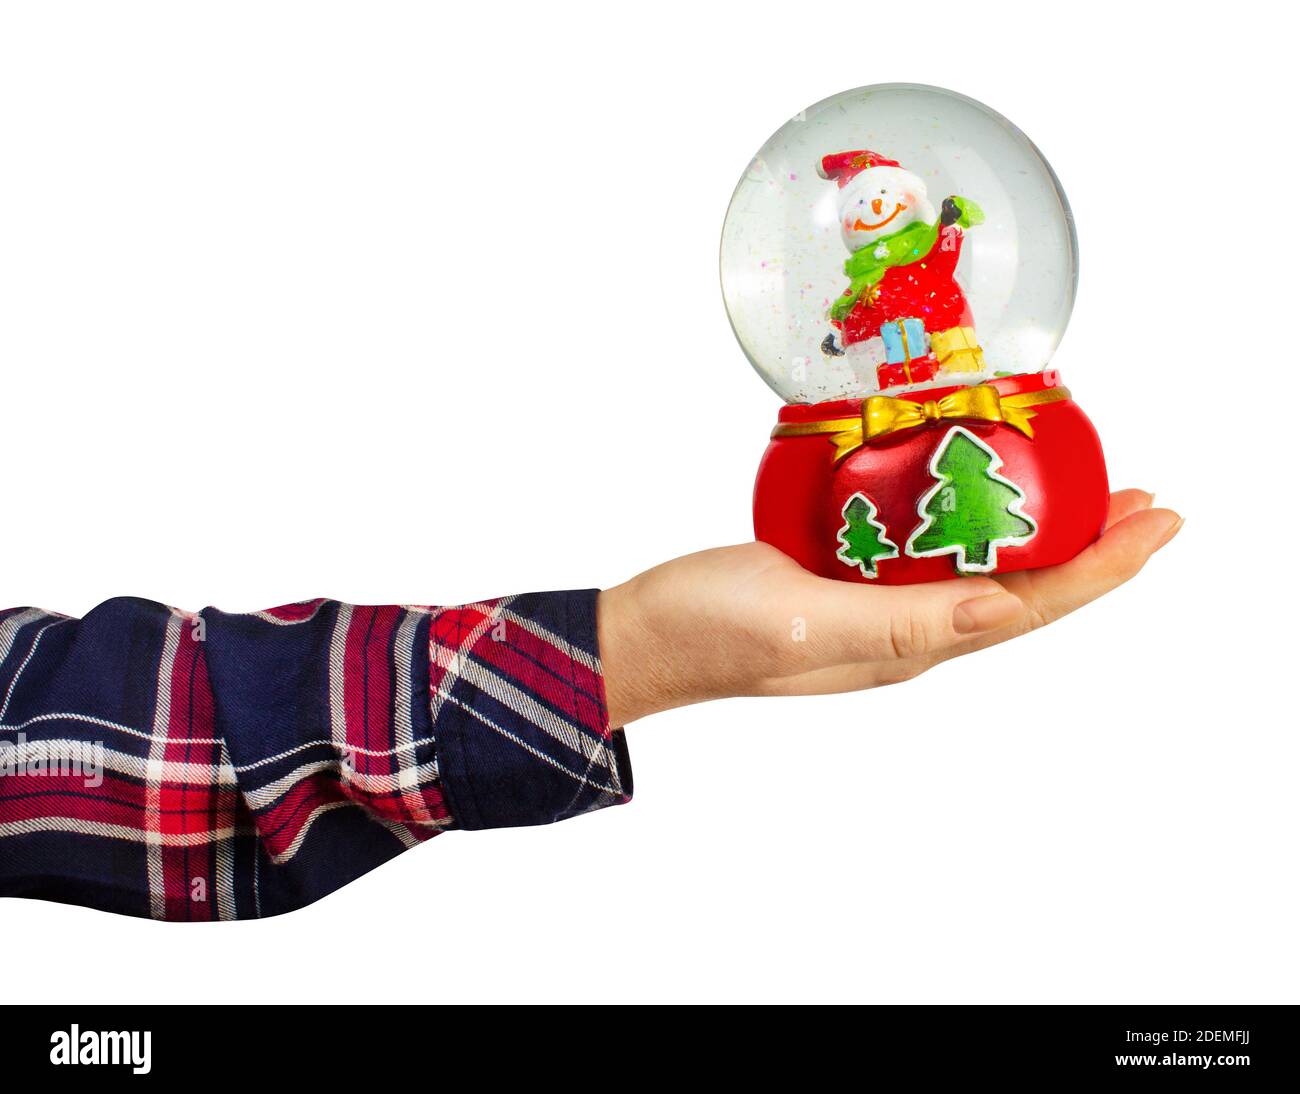 Isolated photo of a girl hand in shirt holding christmas decorative snowball toy on white background. Stock Photo